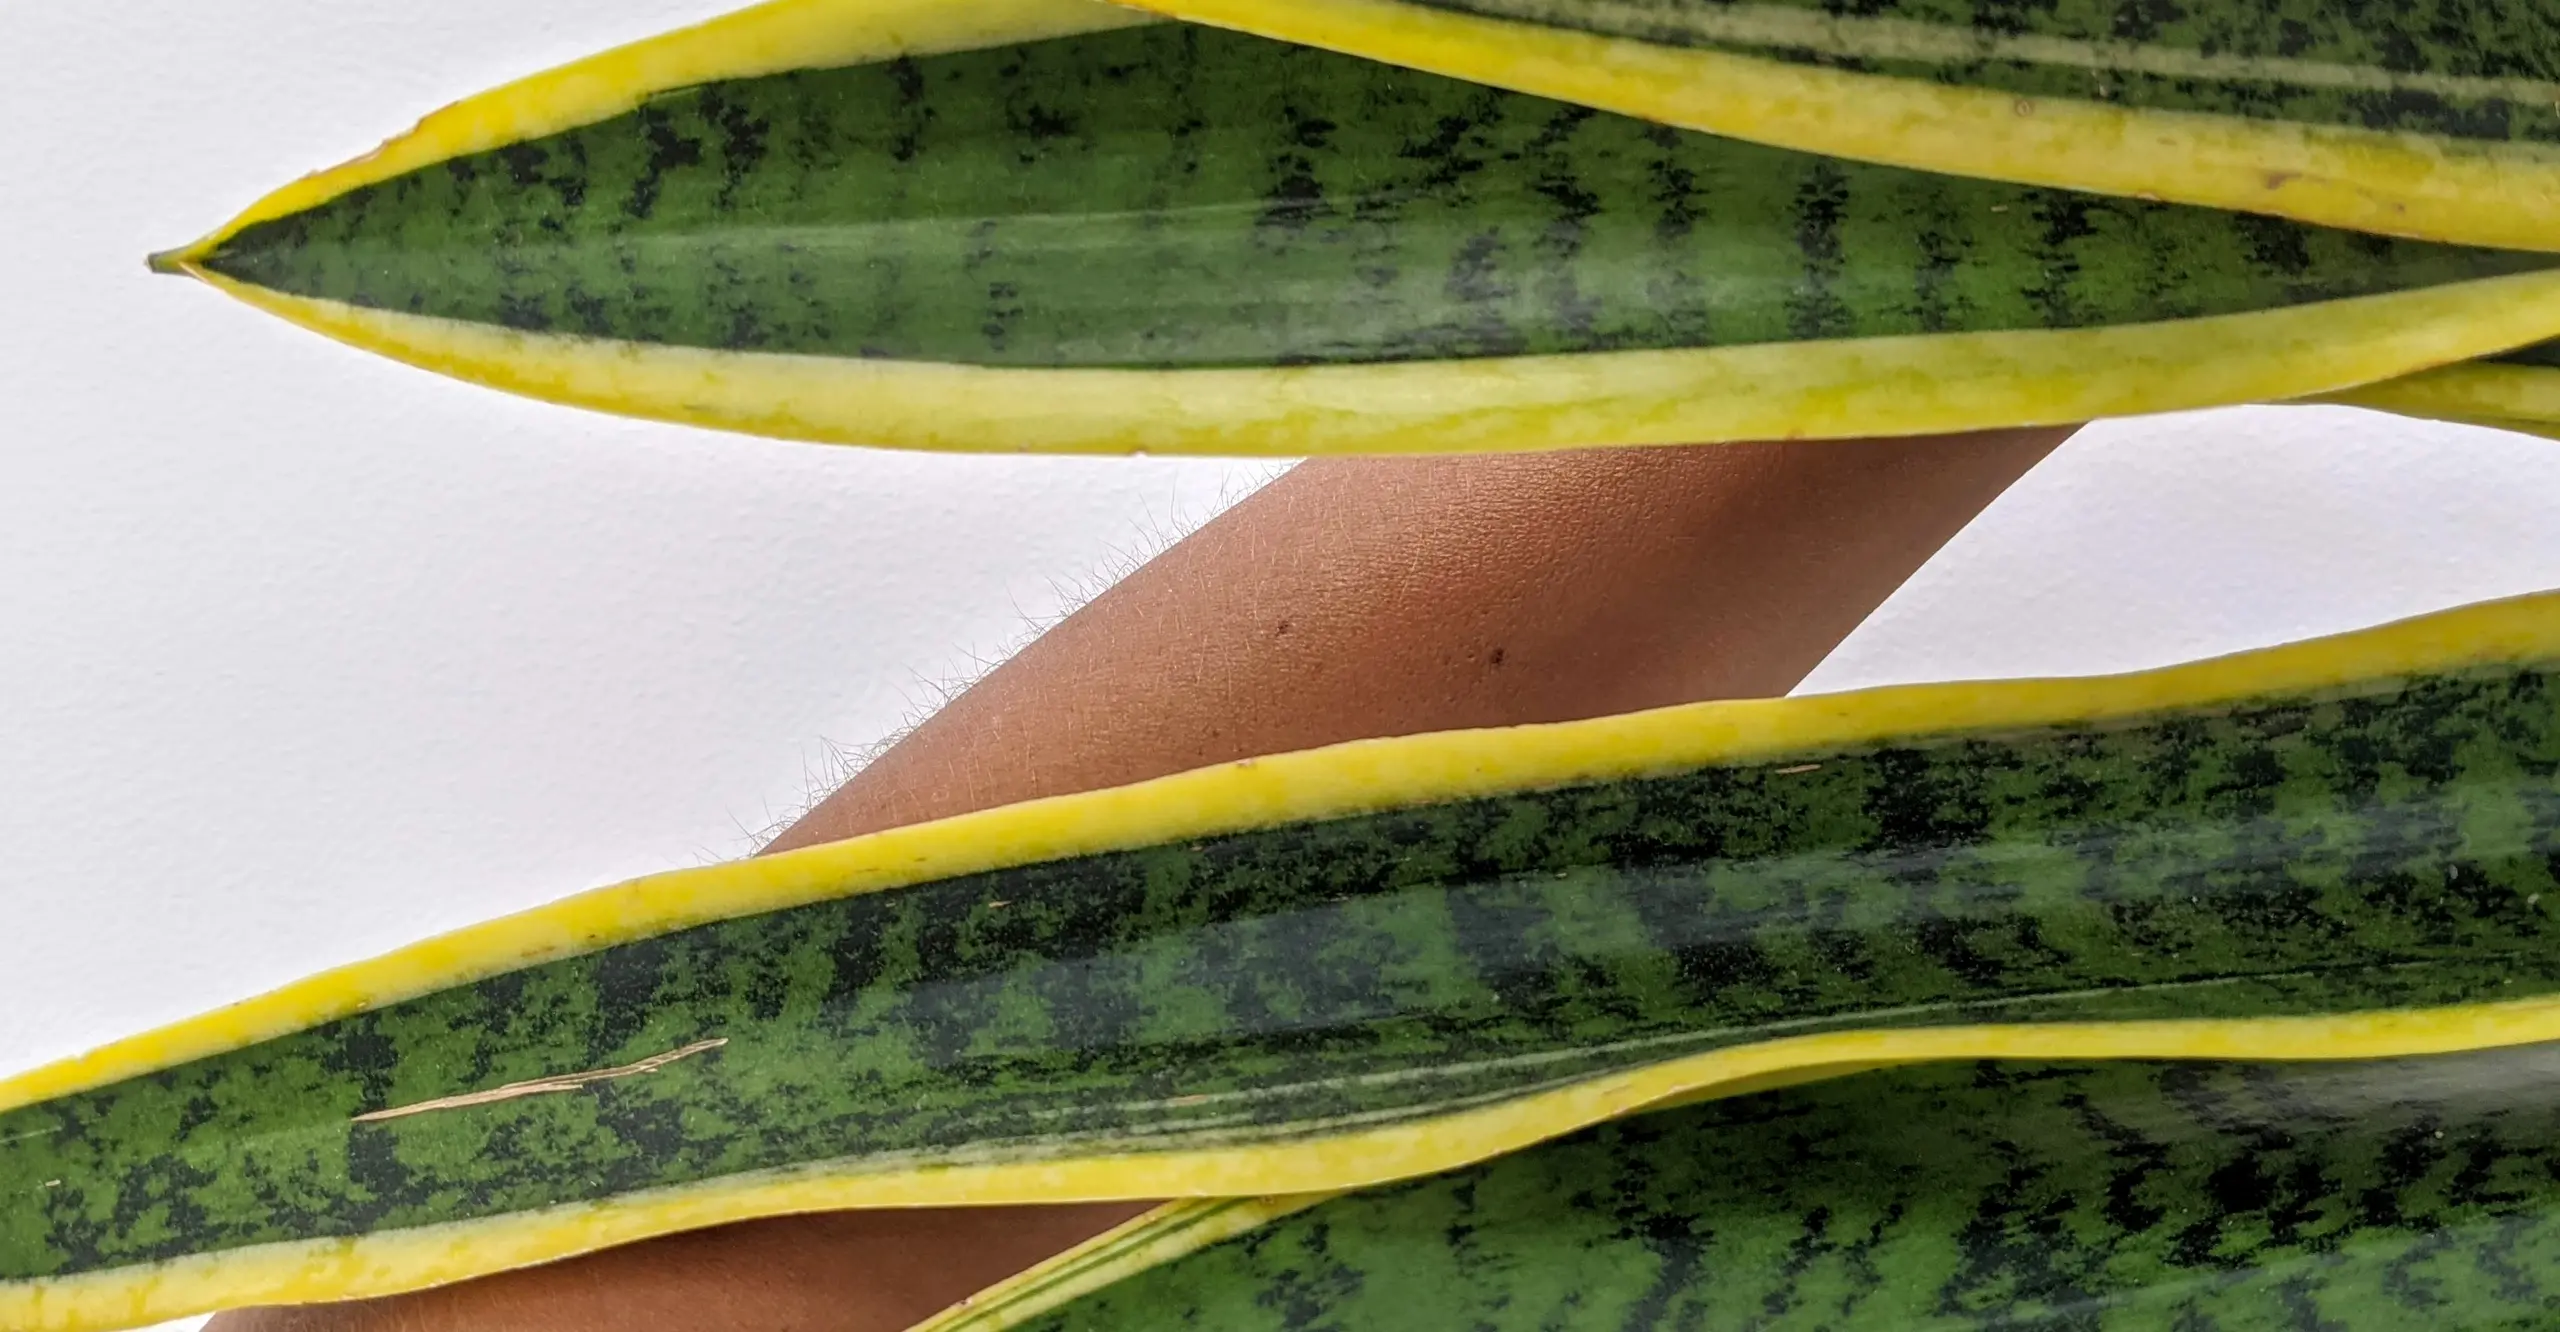 Colour photograph with a finger that is partially obscured by four plant leaves